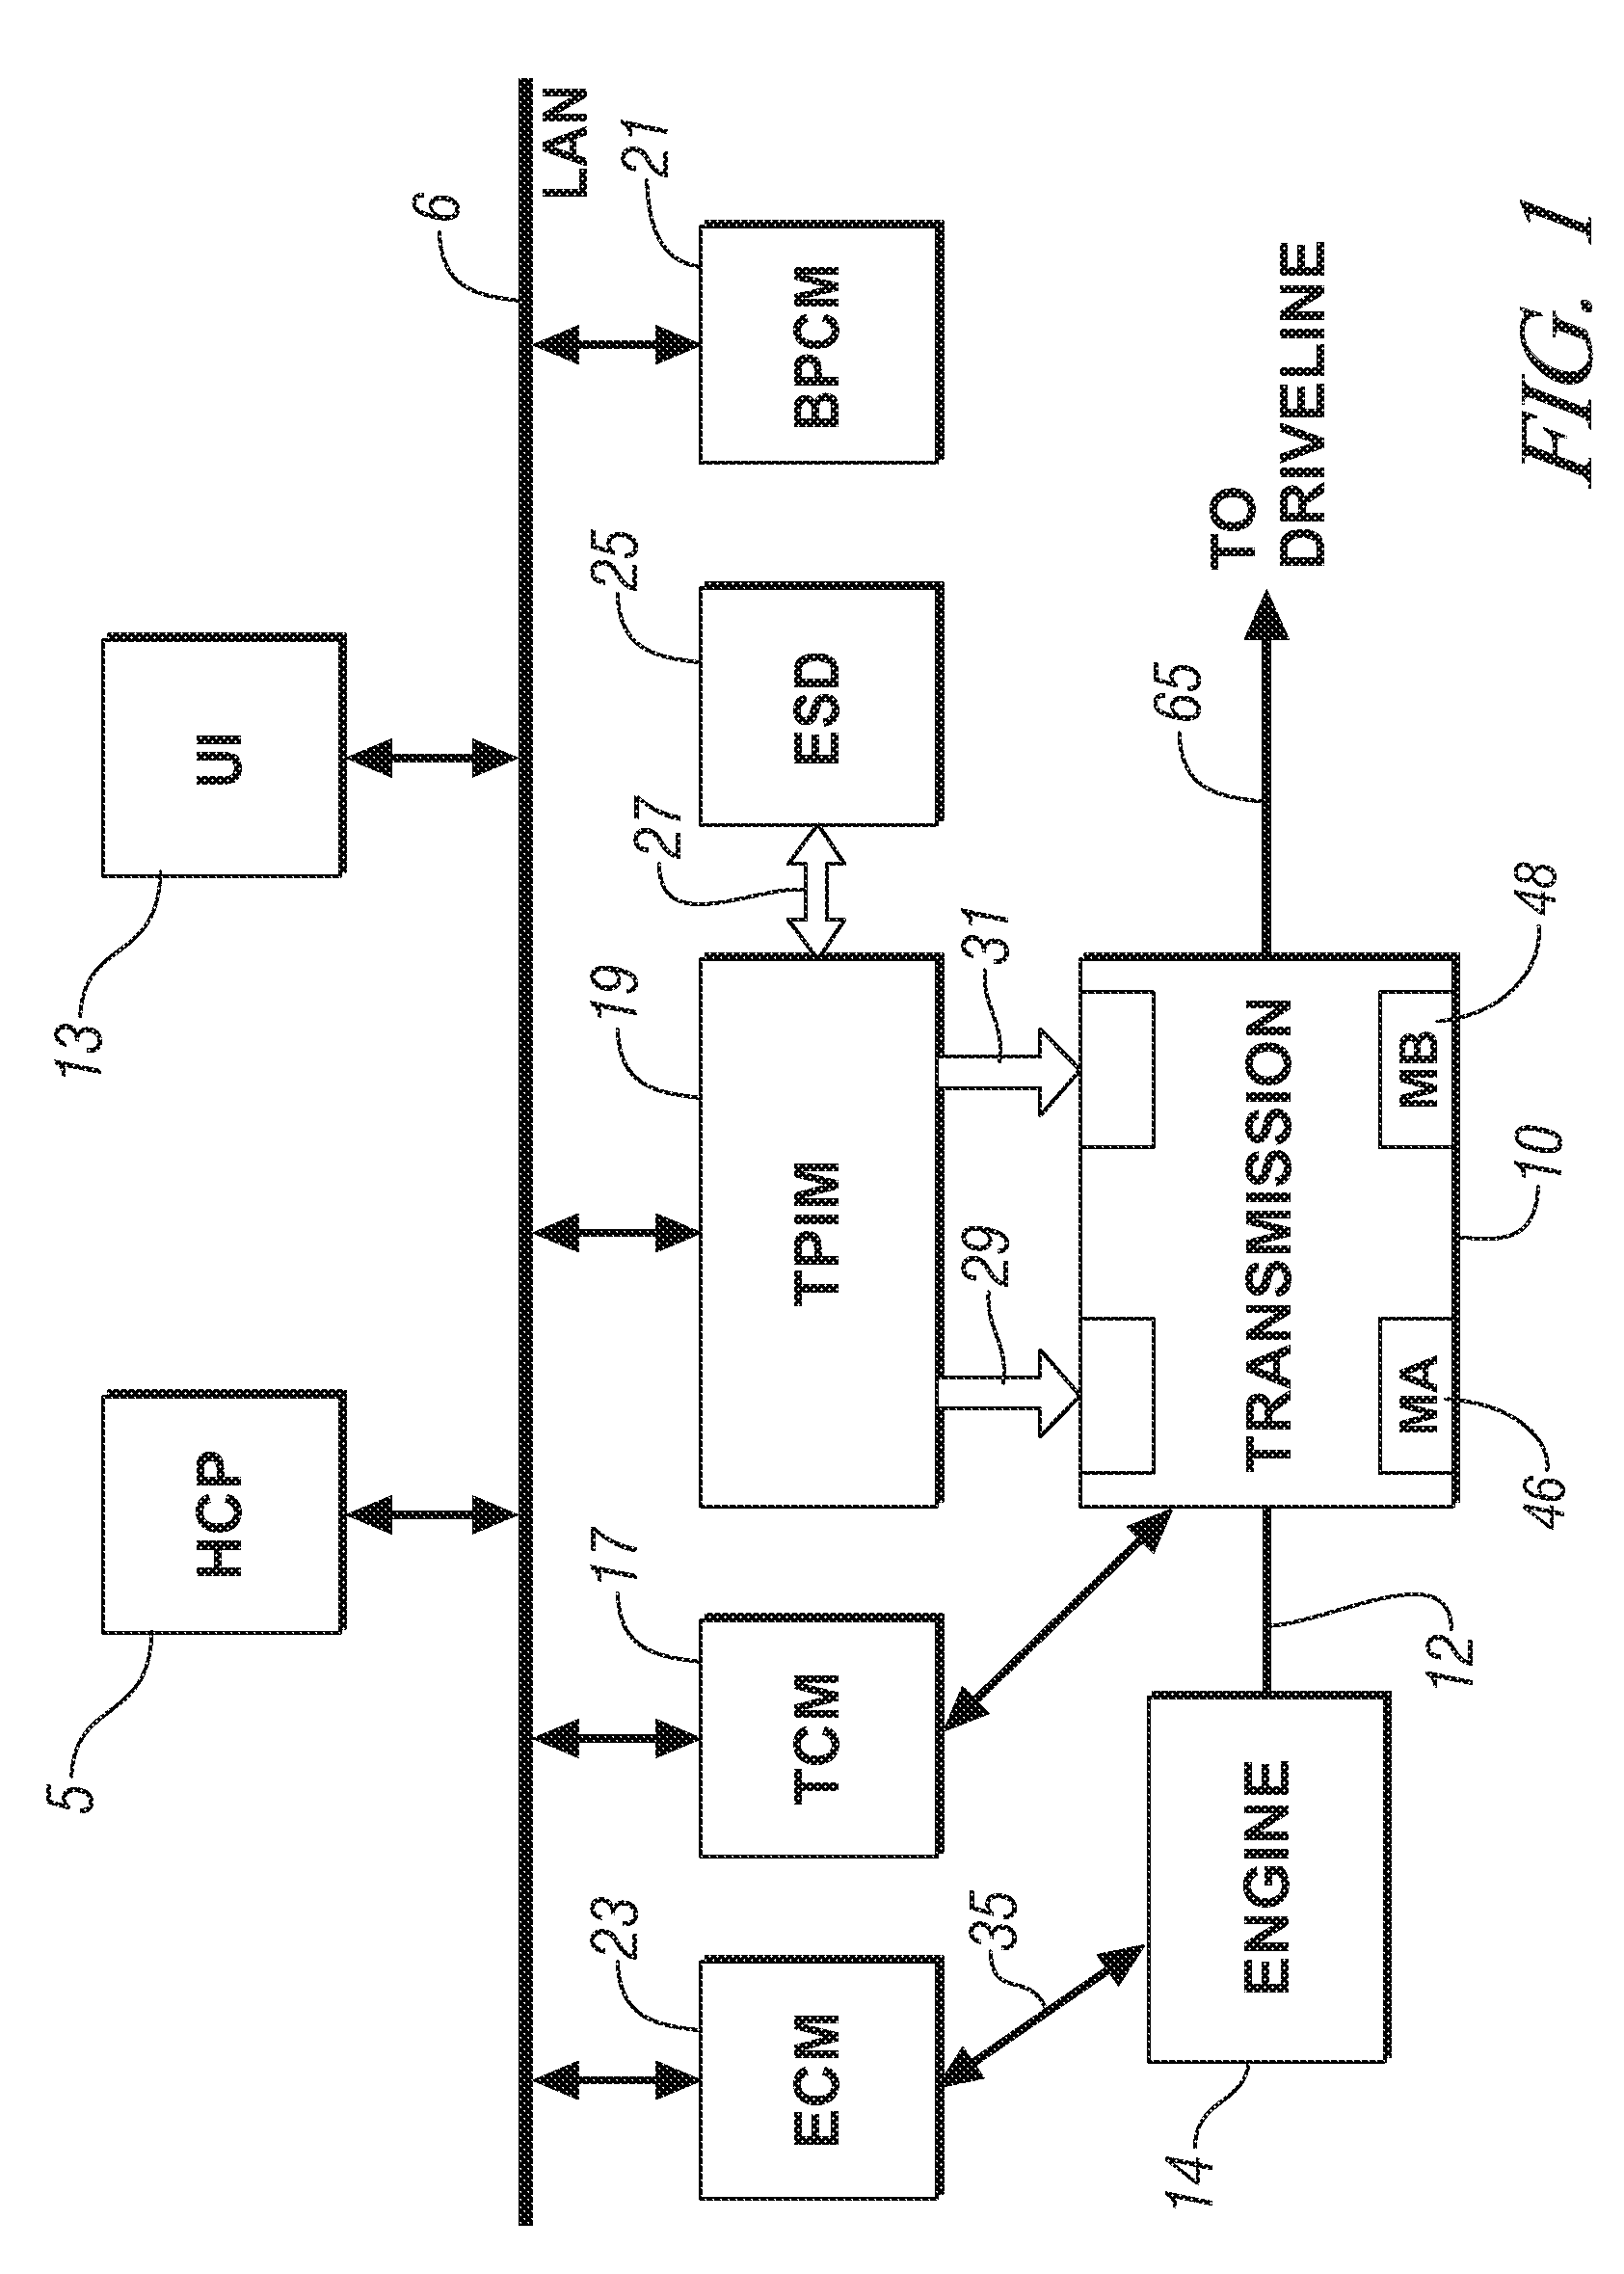 Method and apparatus to monitor a temperature sensing device